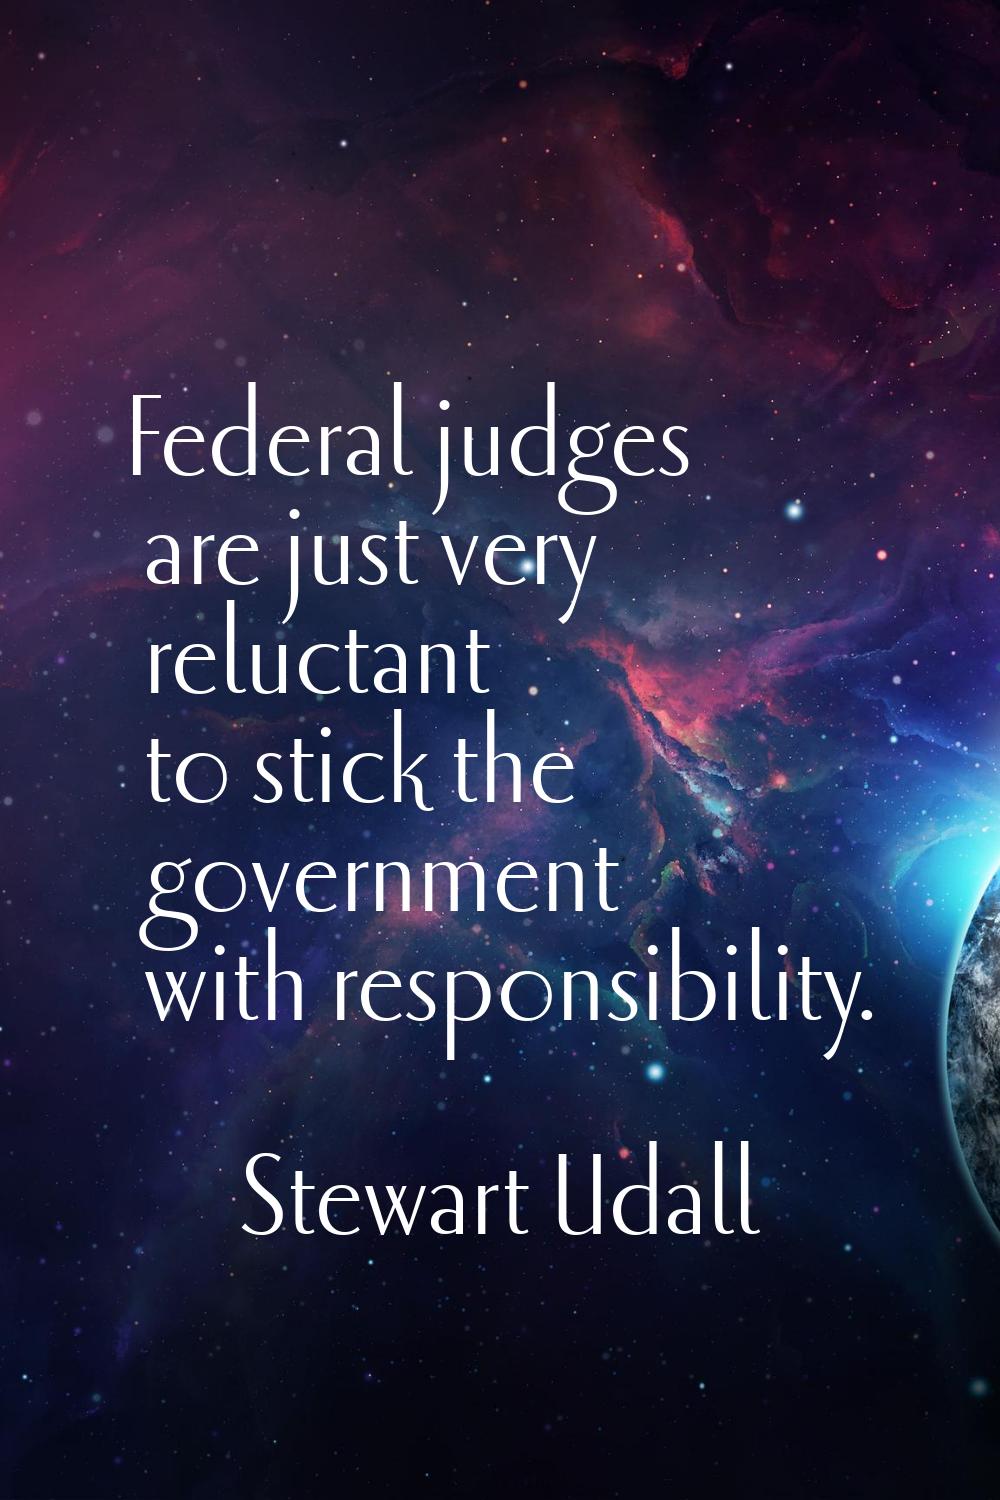 Federal judges are just very reluctant to stick the government with responsibility.